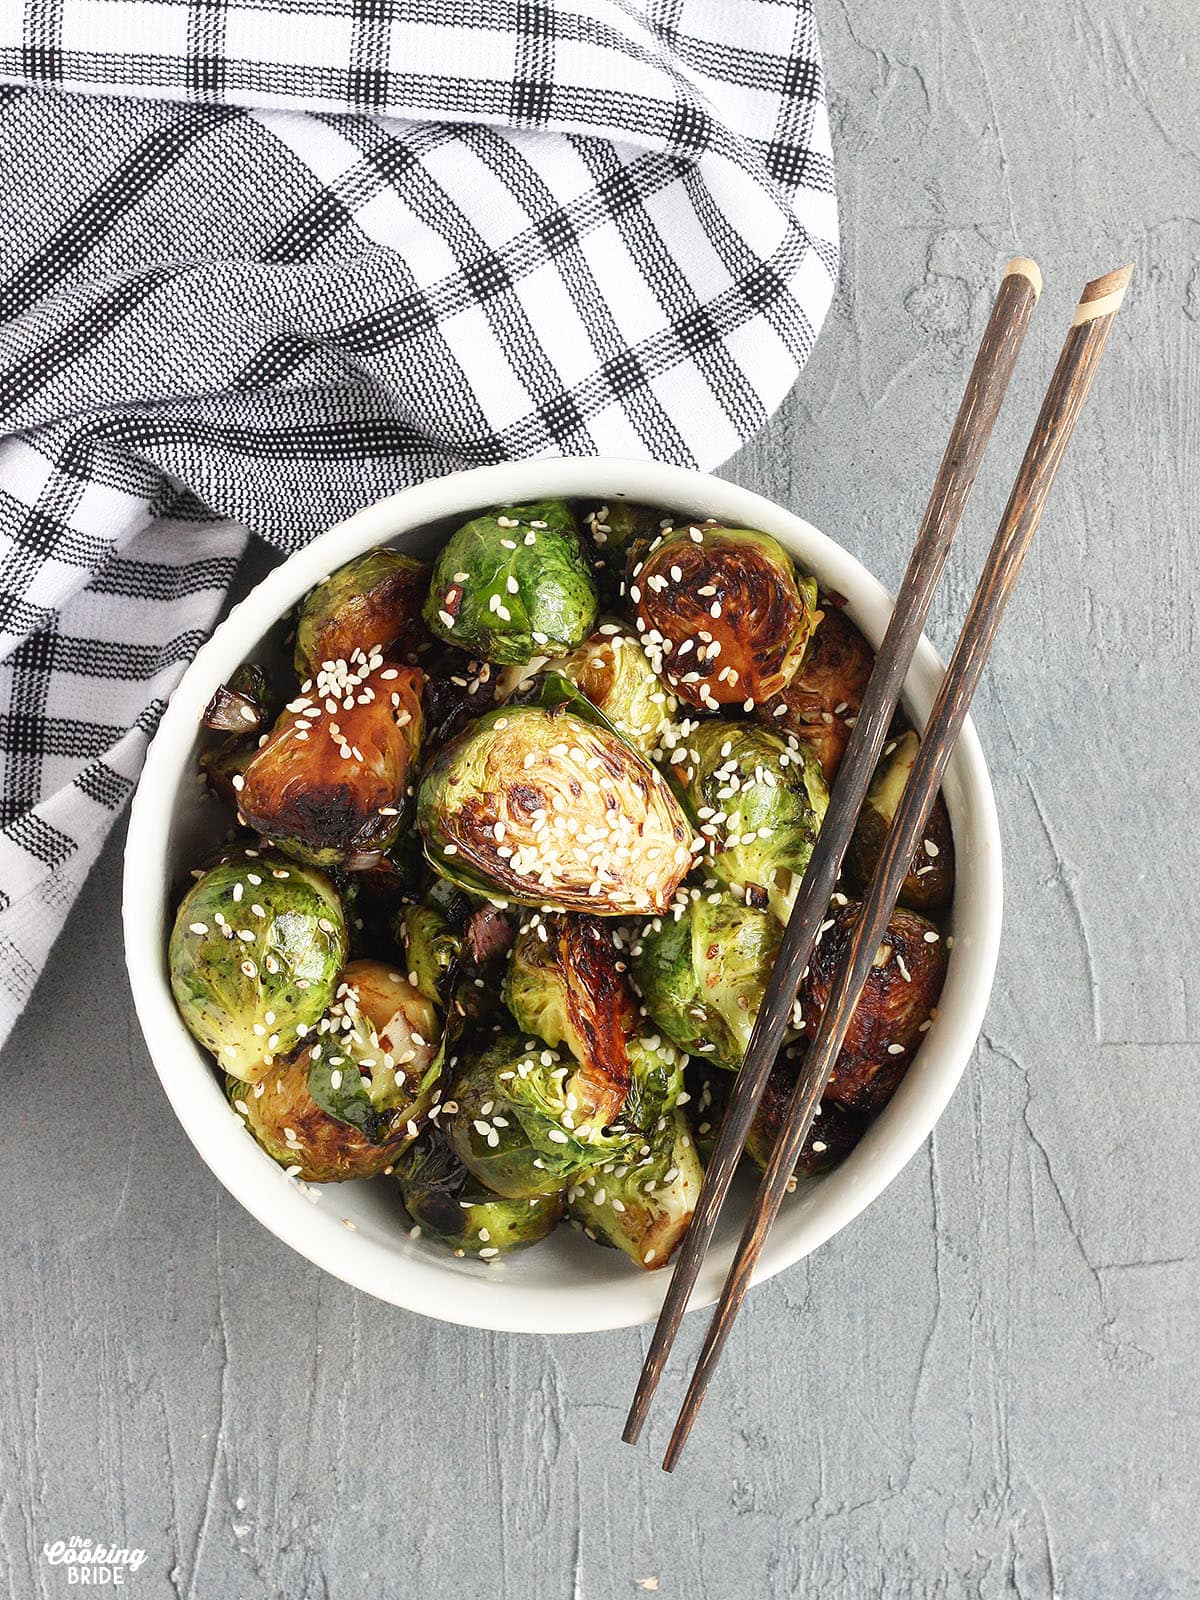 Overhead shot of Stir fried Brussels sprouts garnished with sesame seeds in a white bowl with wooden chopsticks resting on the side of the bowl.